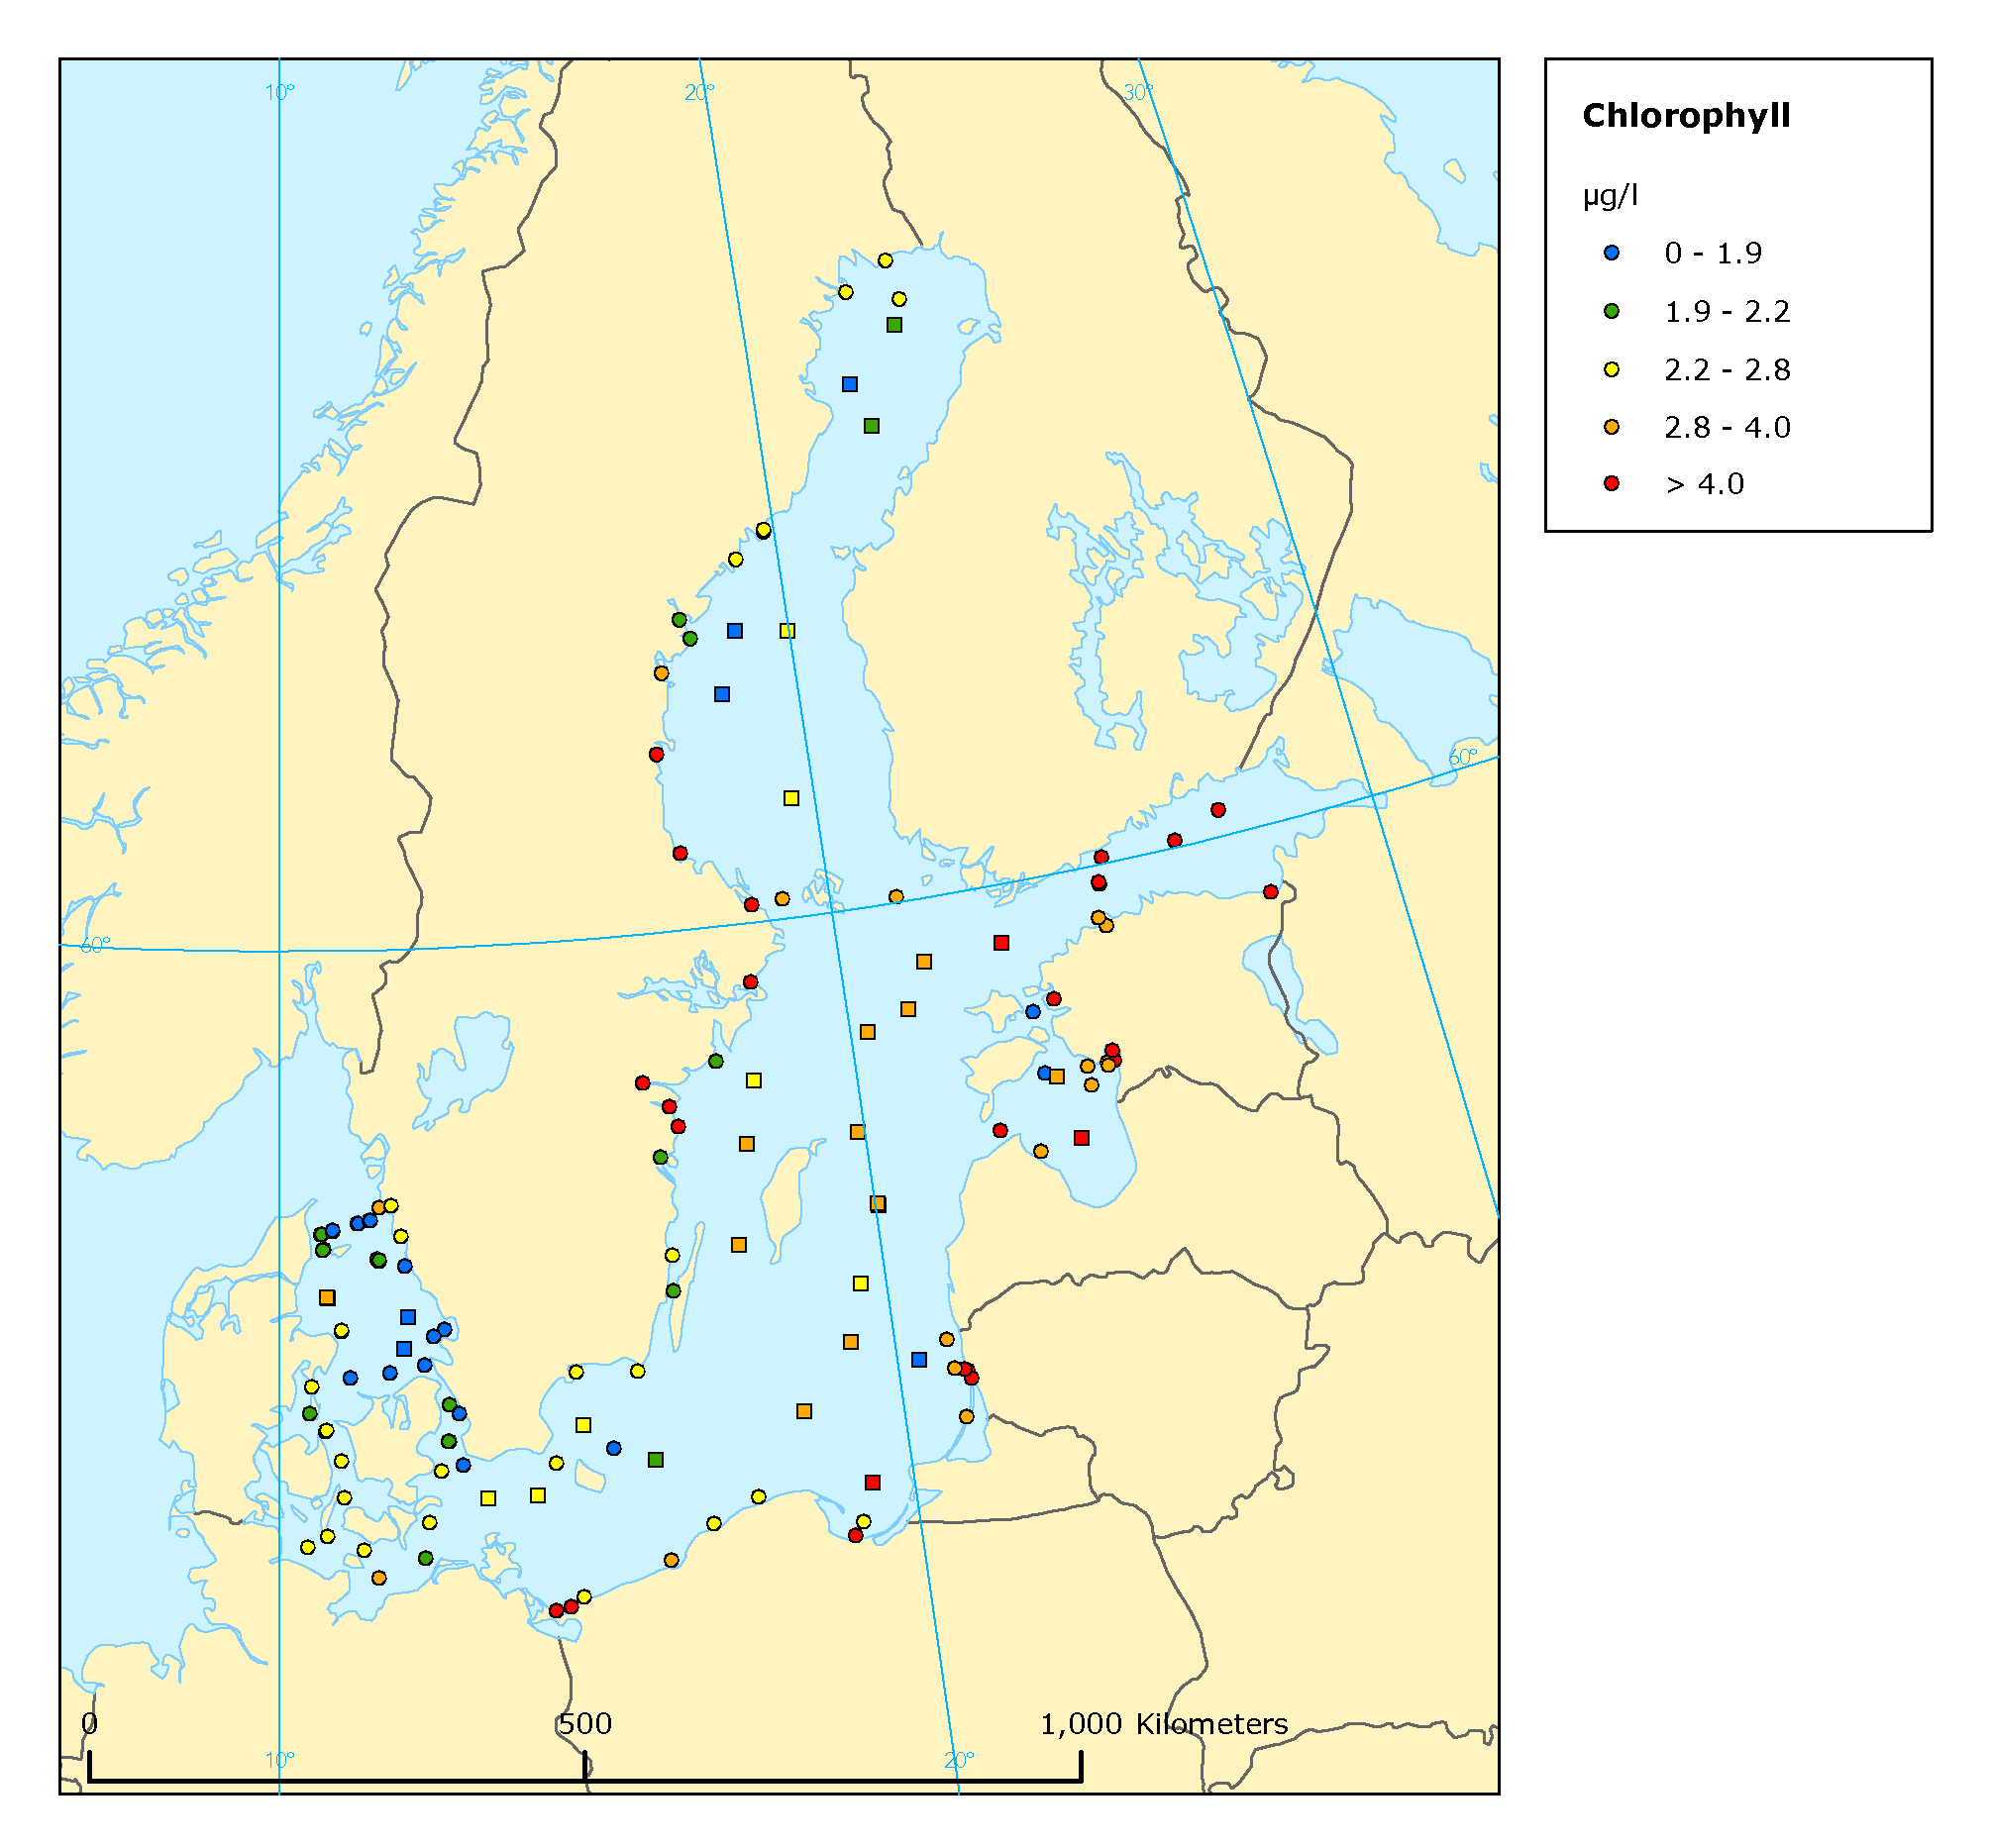 Mean summer surface concentrations of chlorophyll a in the Baltic Sea Area, 2003